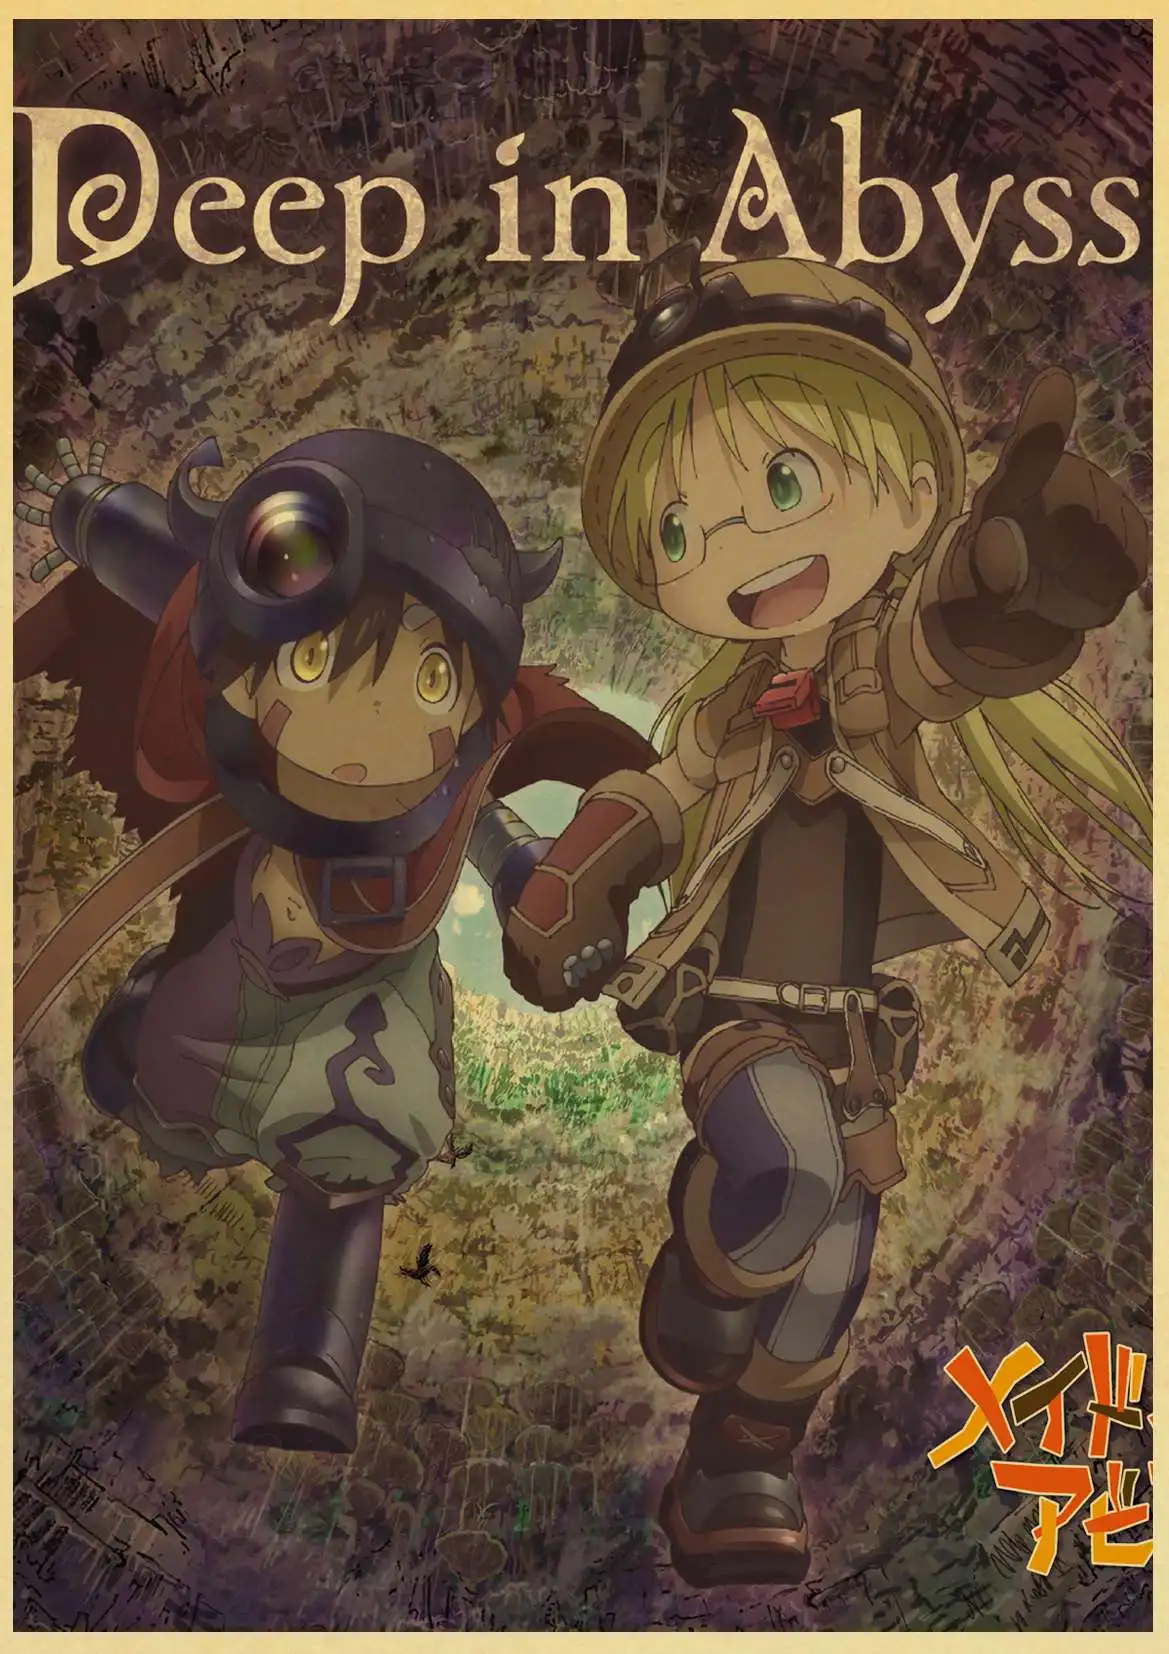 Made in abyss Faputa Unisex anime manga Tshirt Poster for Sale by [-A-]  Industrie s